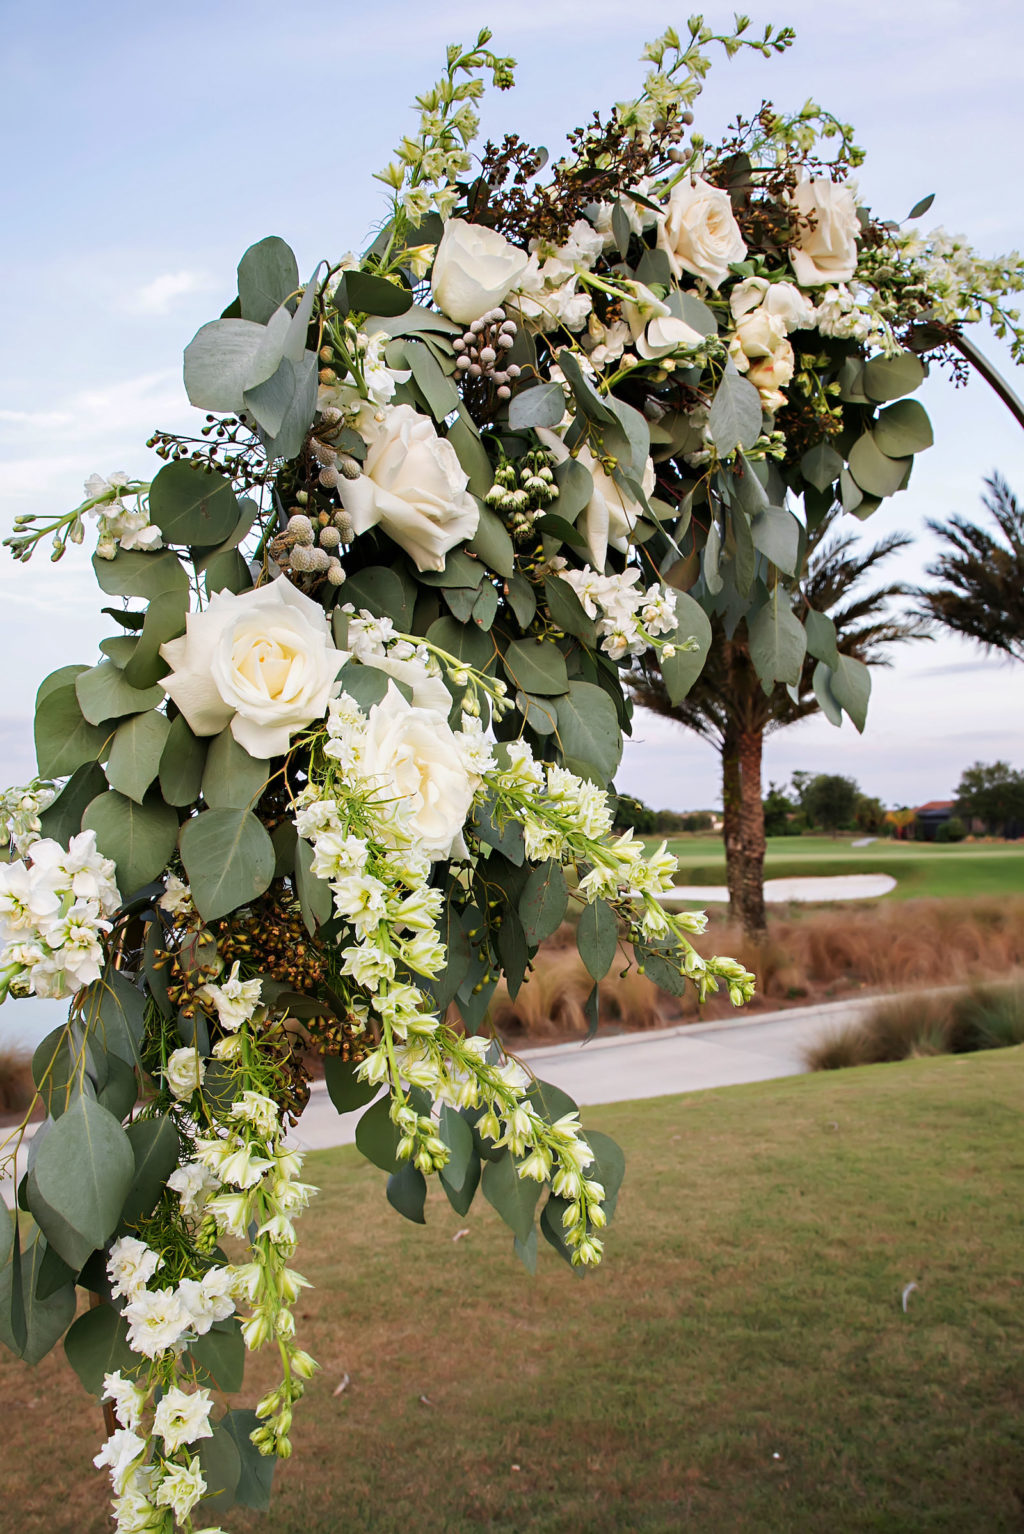 Romantic Floral Arrangement on Circular Metal arch, White and Ivory Roses, Eucalyptus, Greenery | Tampa Bay Wedding Photographer Limelight Photography | Wedding Florist Beneva Florals | Wedding Planner MDP Events